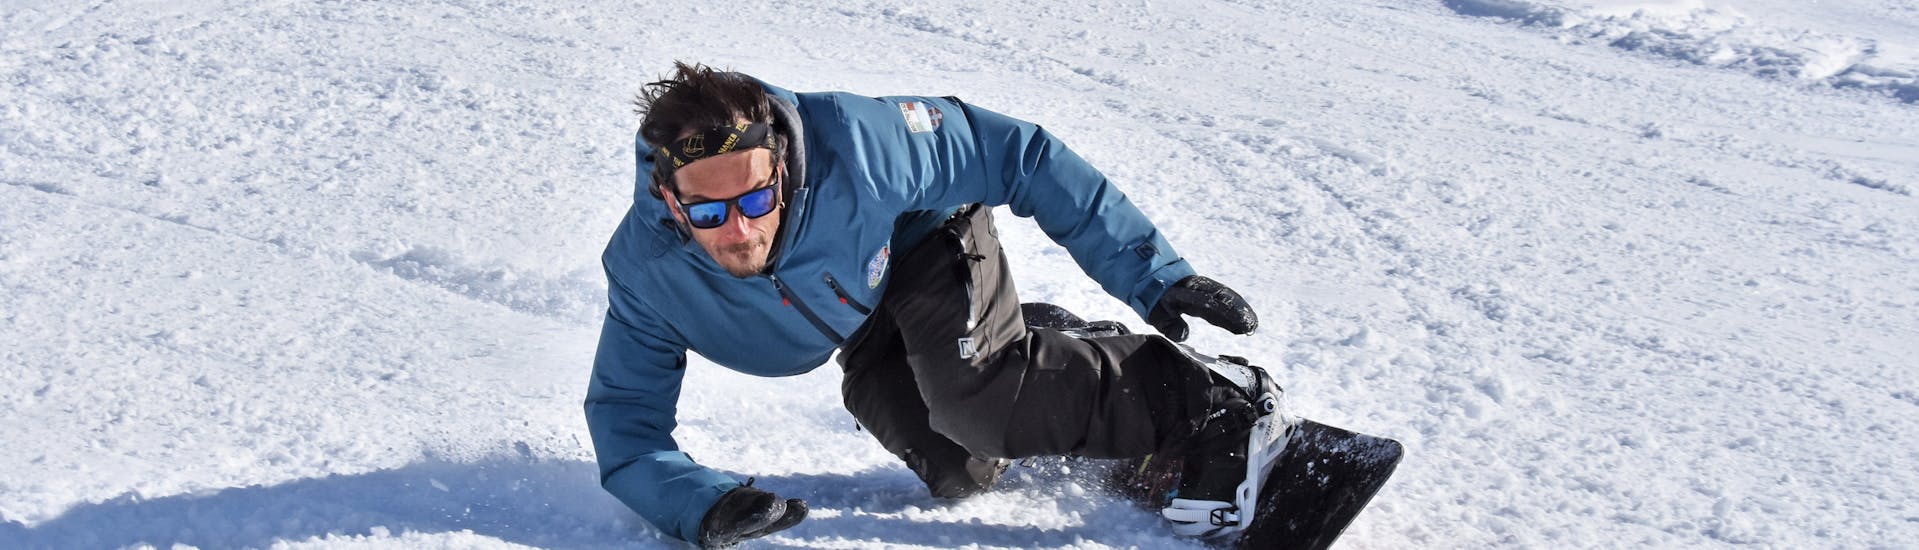 A snowboard instructor is training in Bardonecchia for one of the private snowboarding lessons for kids and adults of all levels.